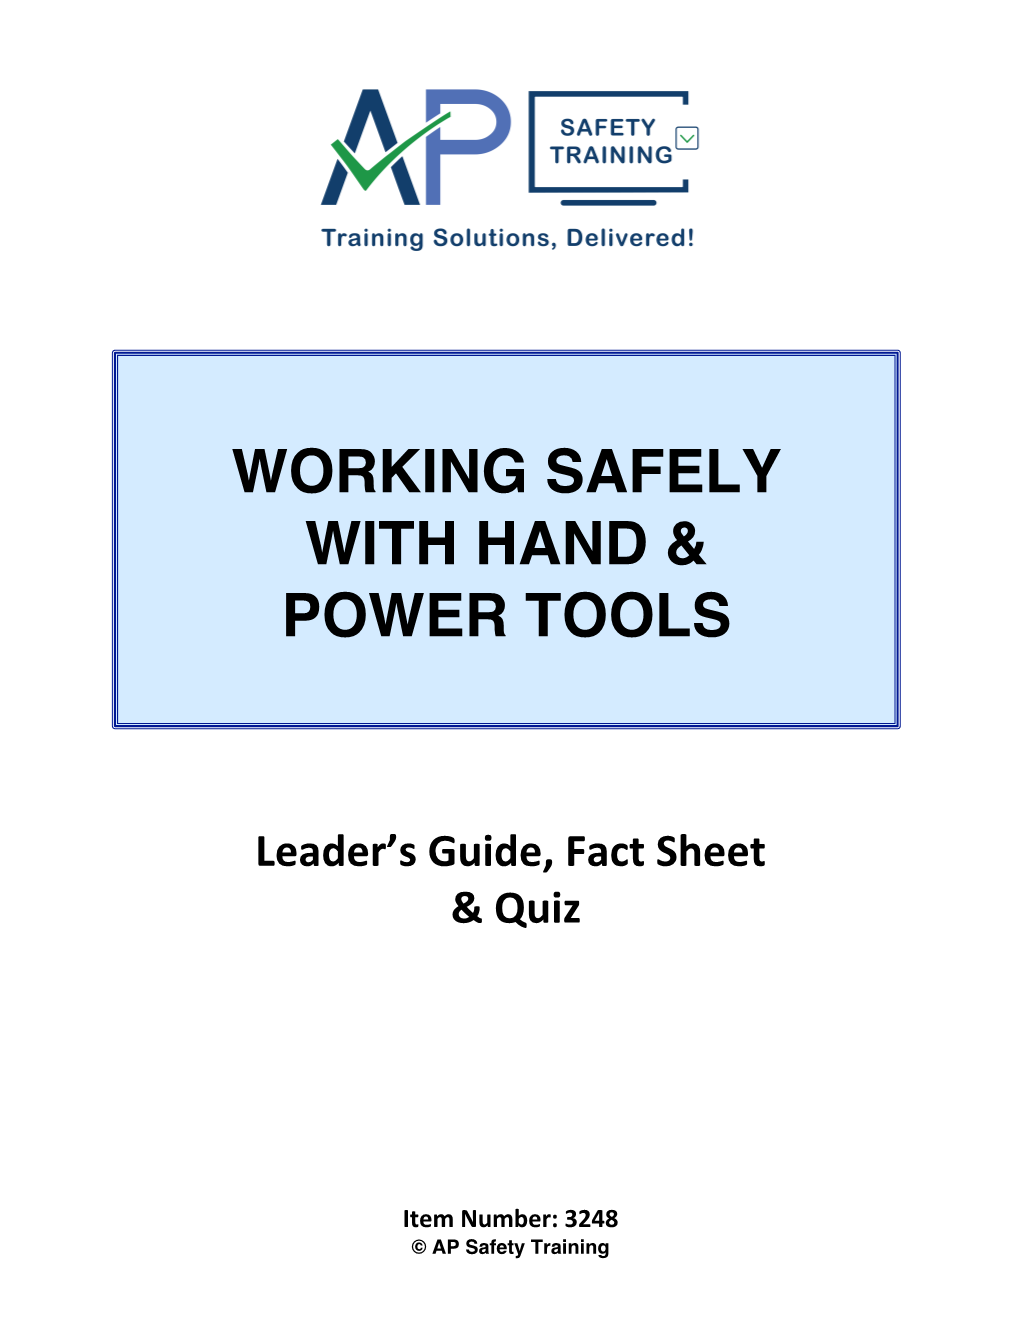 Working Safely with Hand & Power Tools